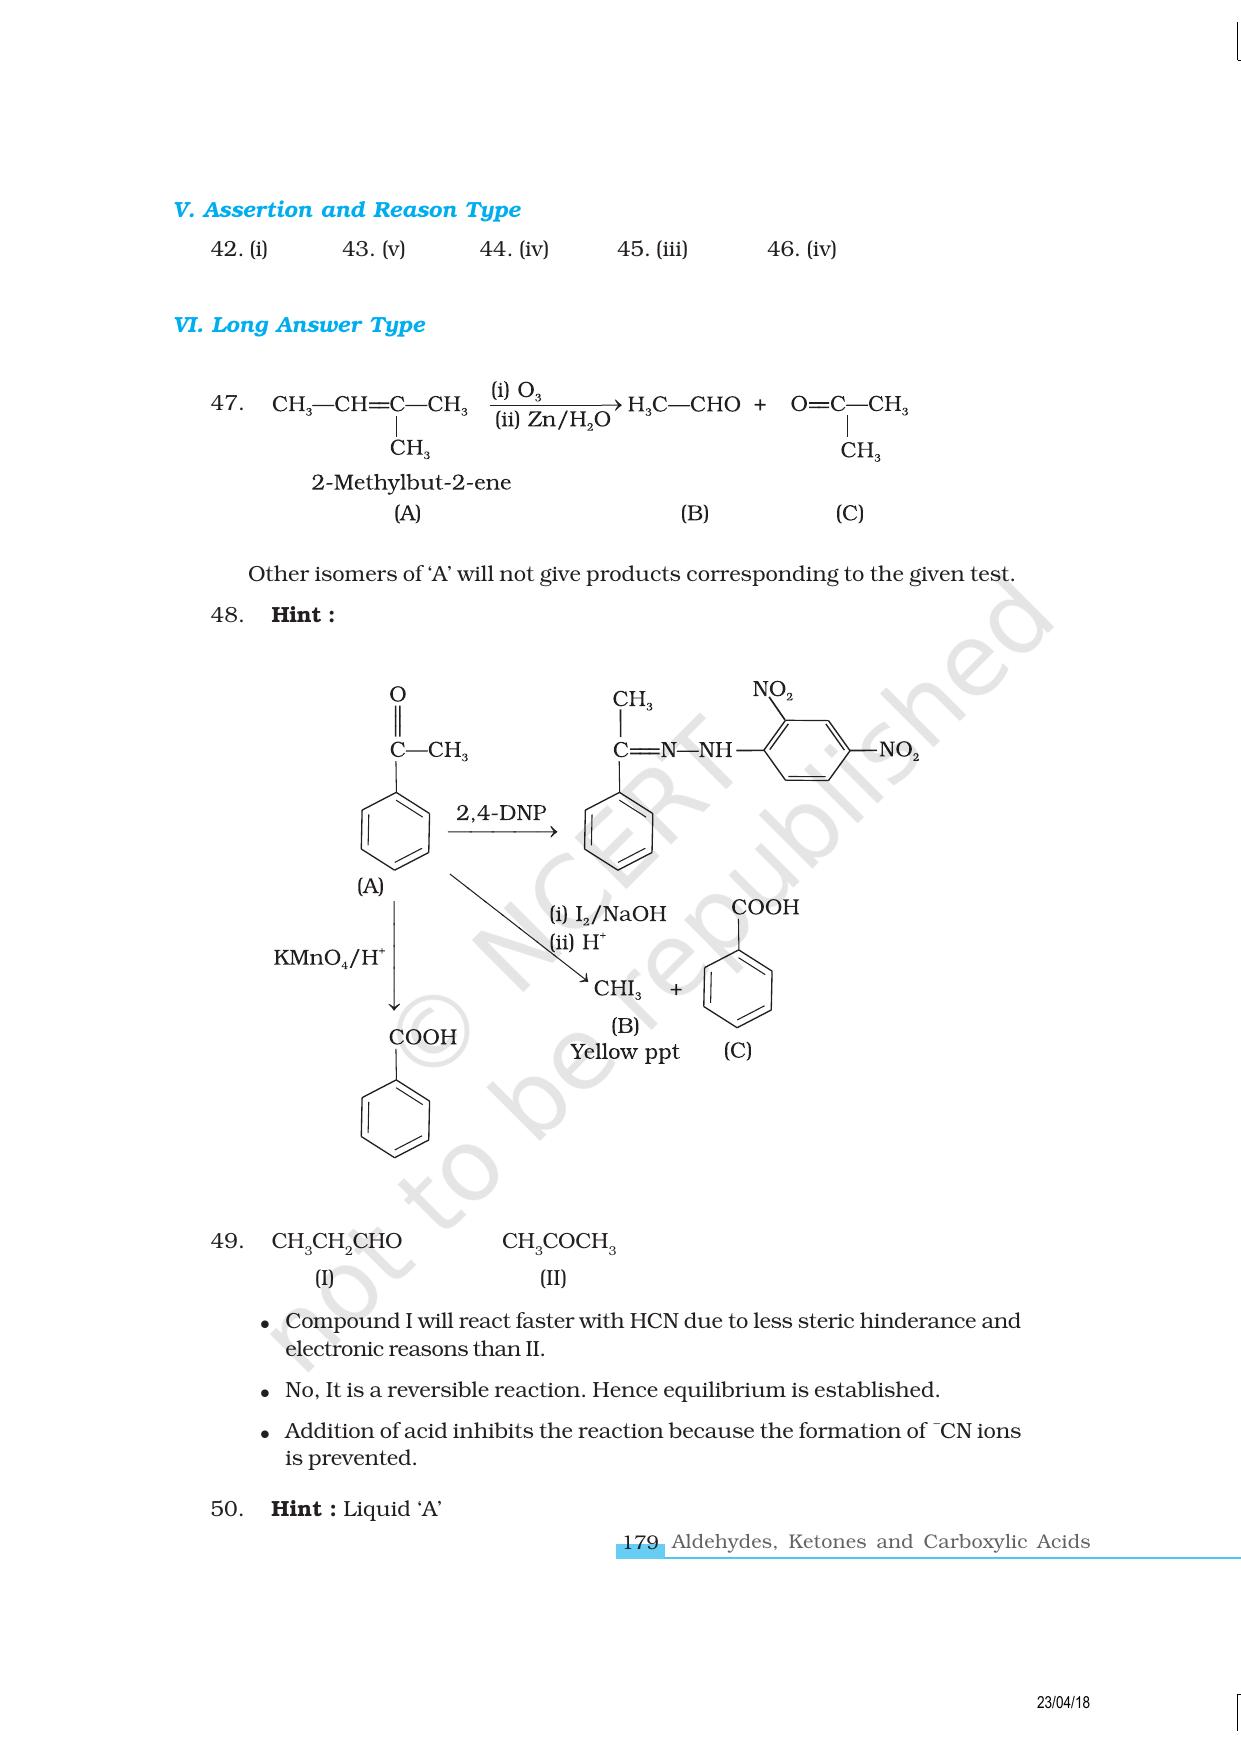 NCERT Exemplar Book for Class 12 Chemistry: Chapter 12 Aldehydes, Ketones and Carboxylic Acids - Page 12